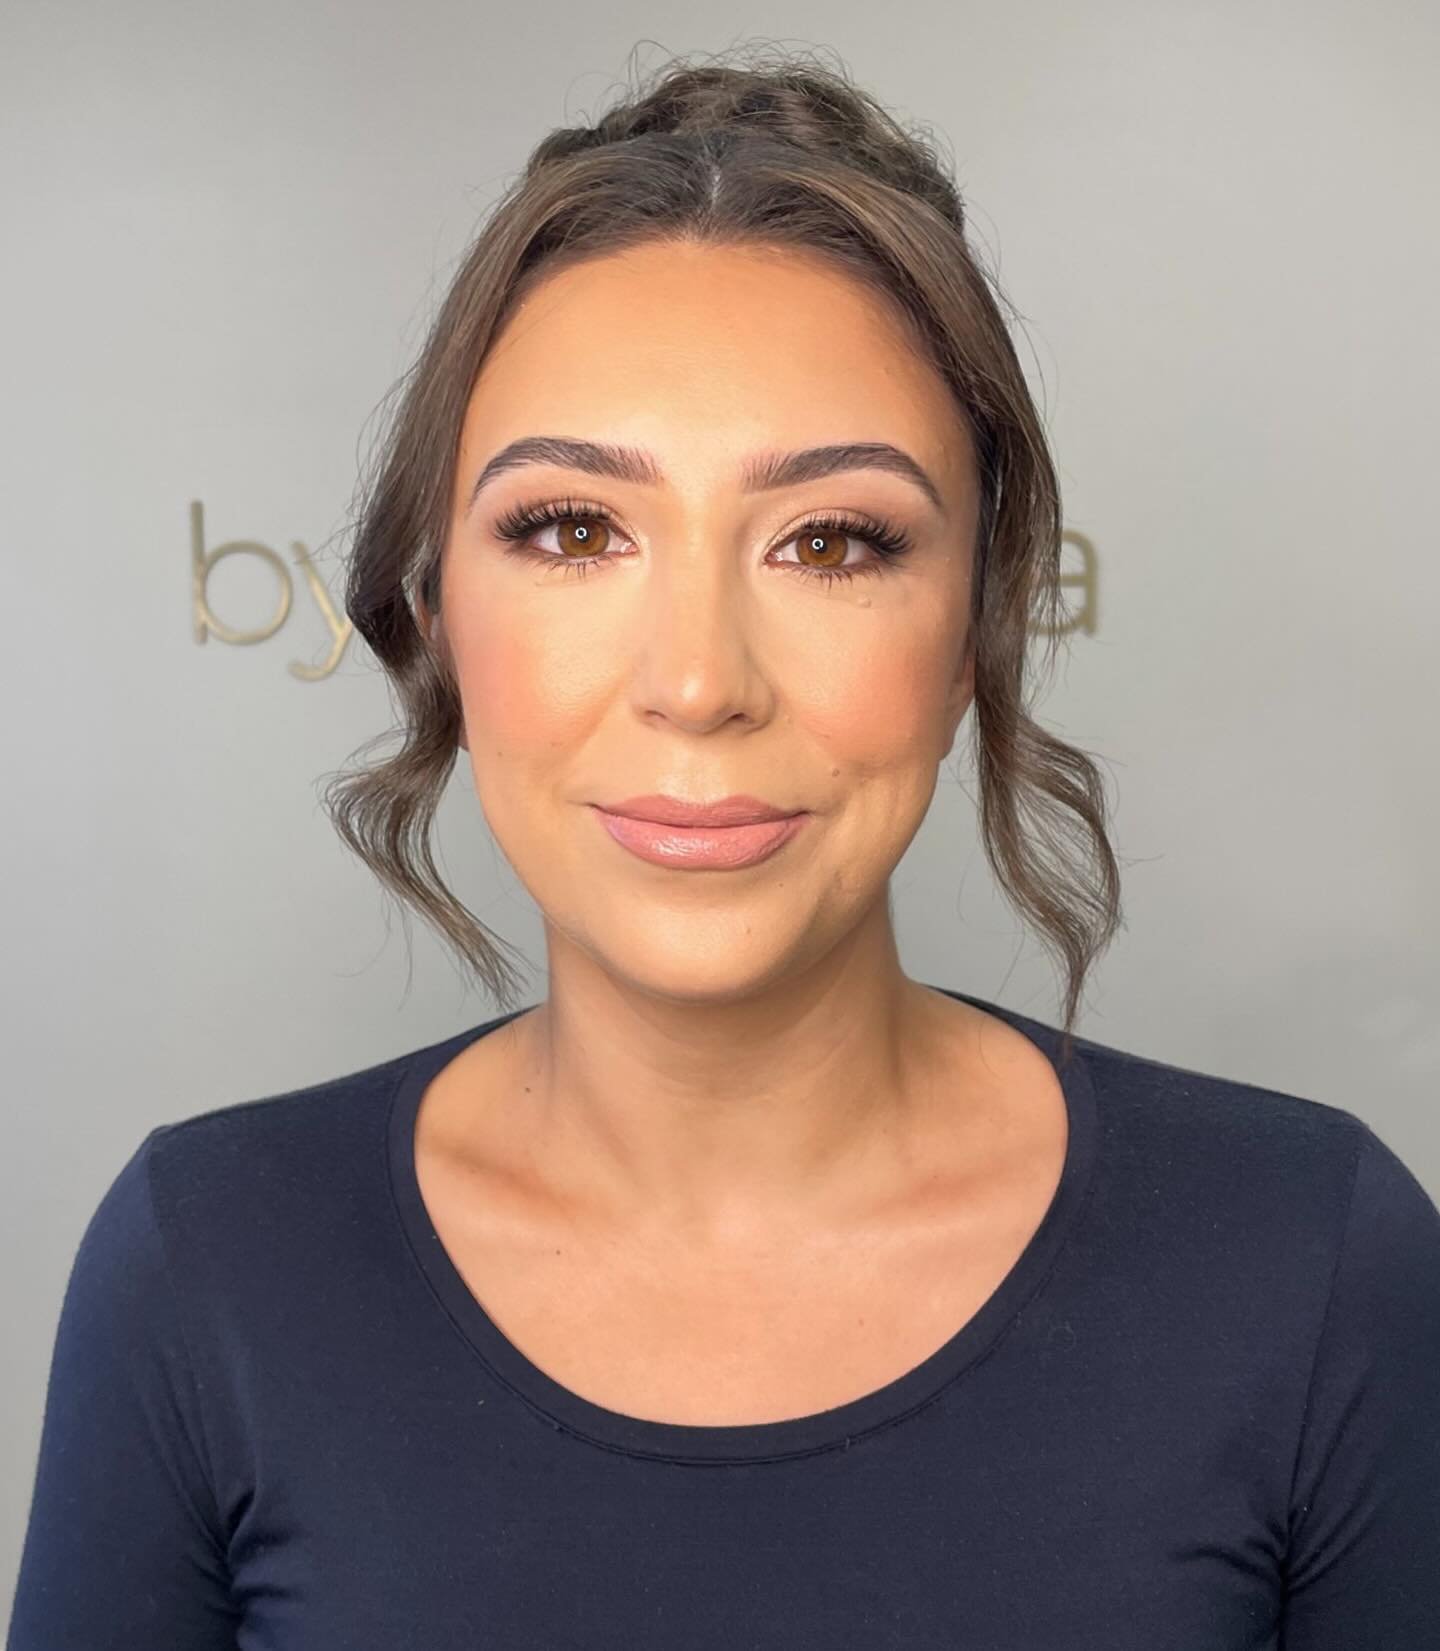 Carmelina in a soft neutral glam! Perfect for transitioning from a day-to-night event 🤎

#mua #makeupartist #makeup #glam #sydneymua #makeupartistsydney #naturalglam #softglam